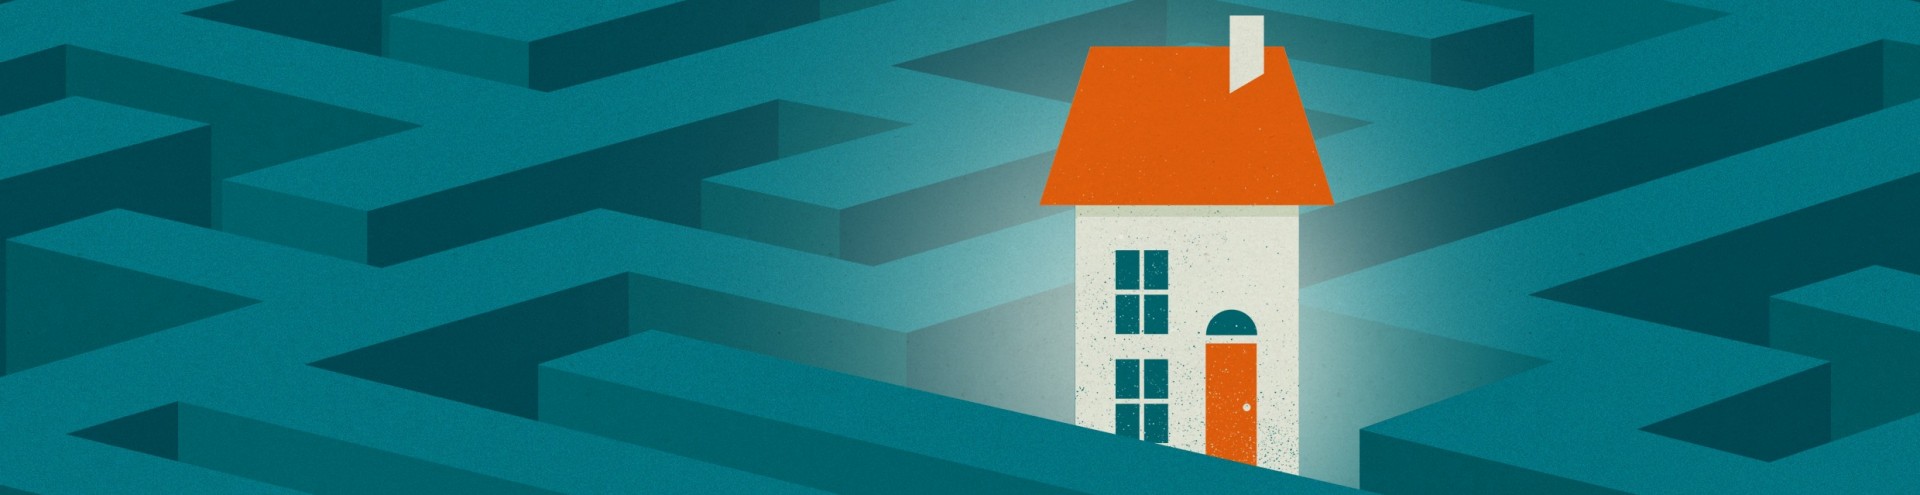 House in the middle of a maze. We'll help you find the right mortgage for you